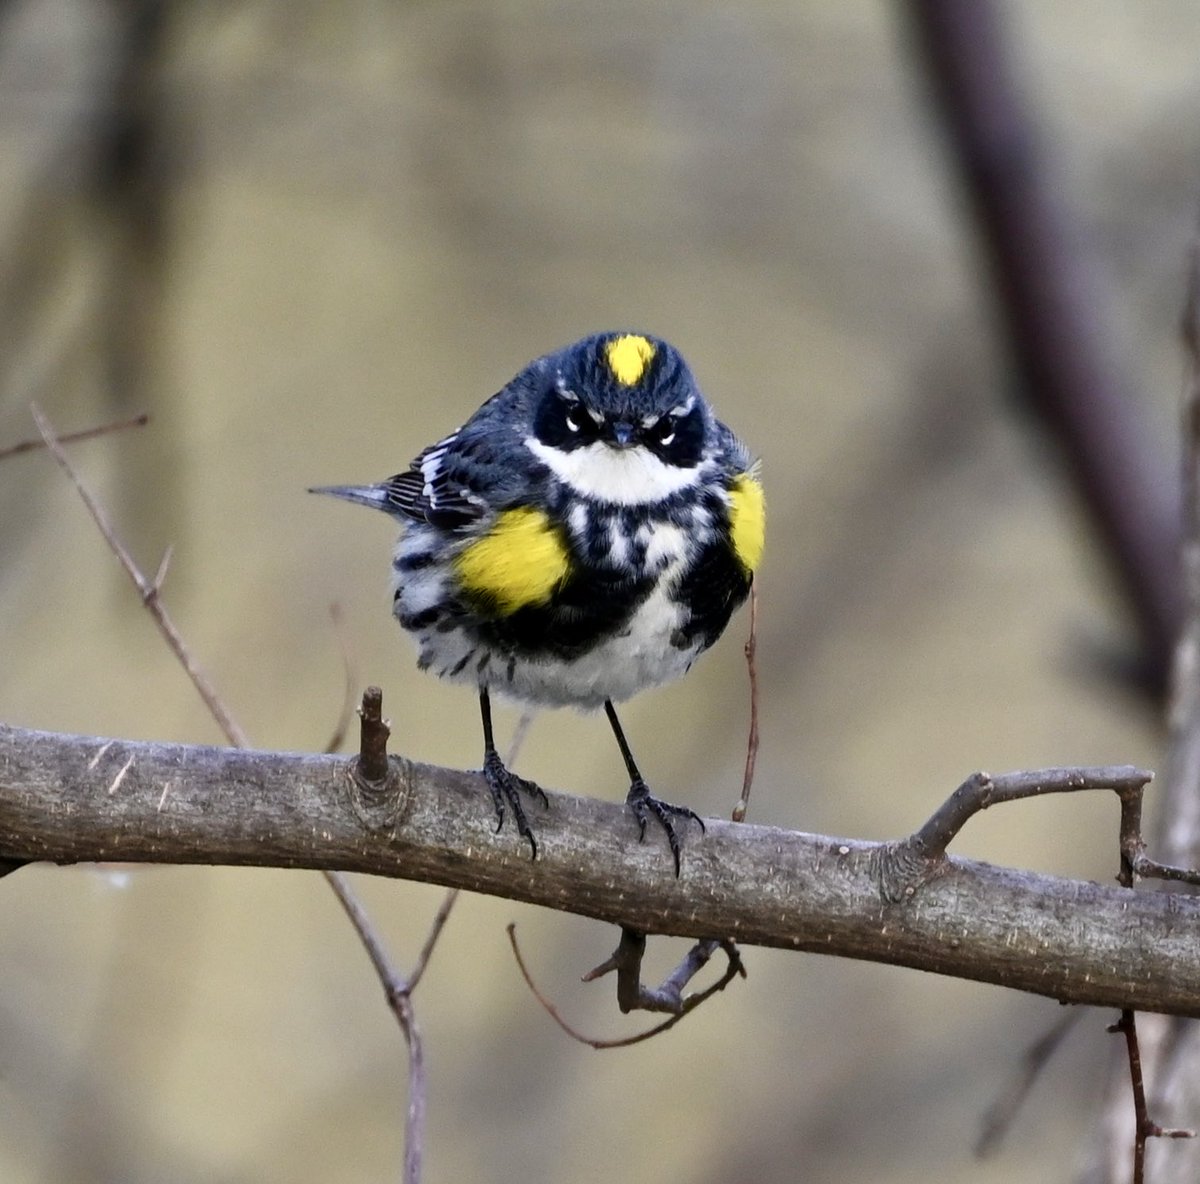 Another masked bandit, this yellow-rumped warbler was fluttering around the Ramble early this morning. #birds #birdwatching #birdcpp #mymorninngwalk #nyc